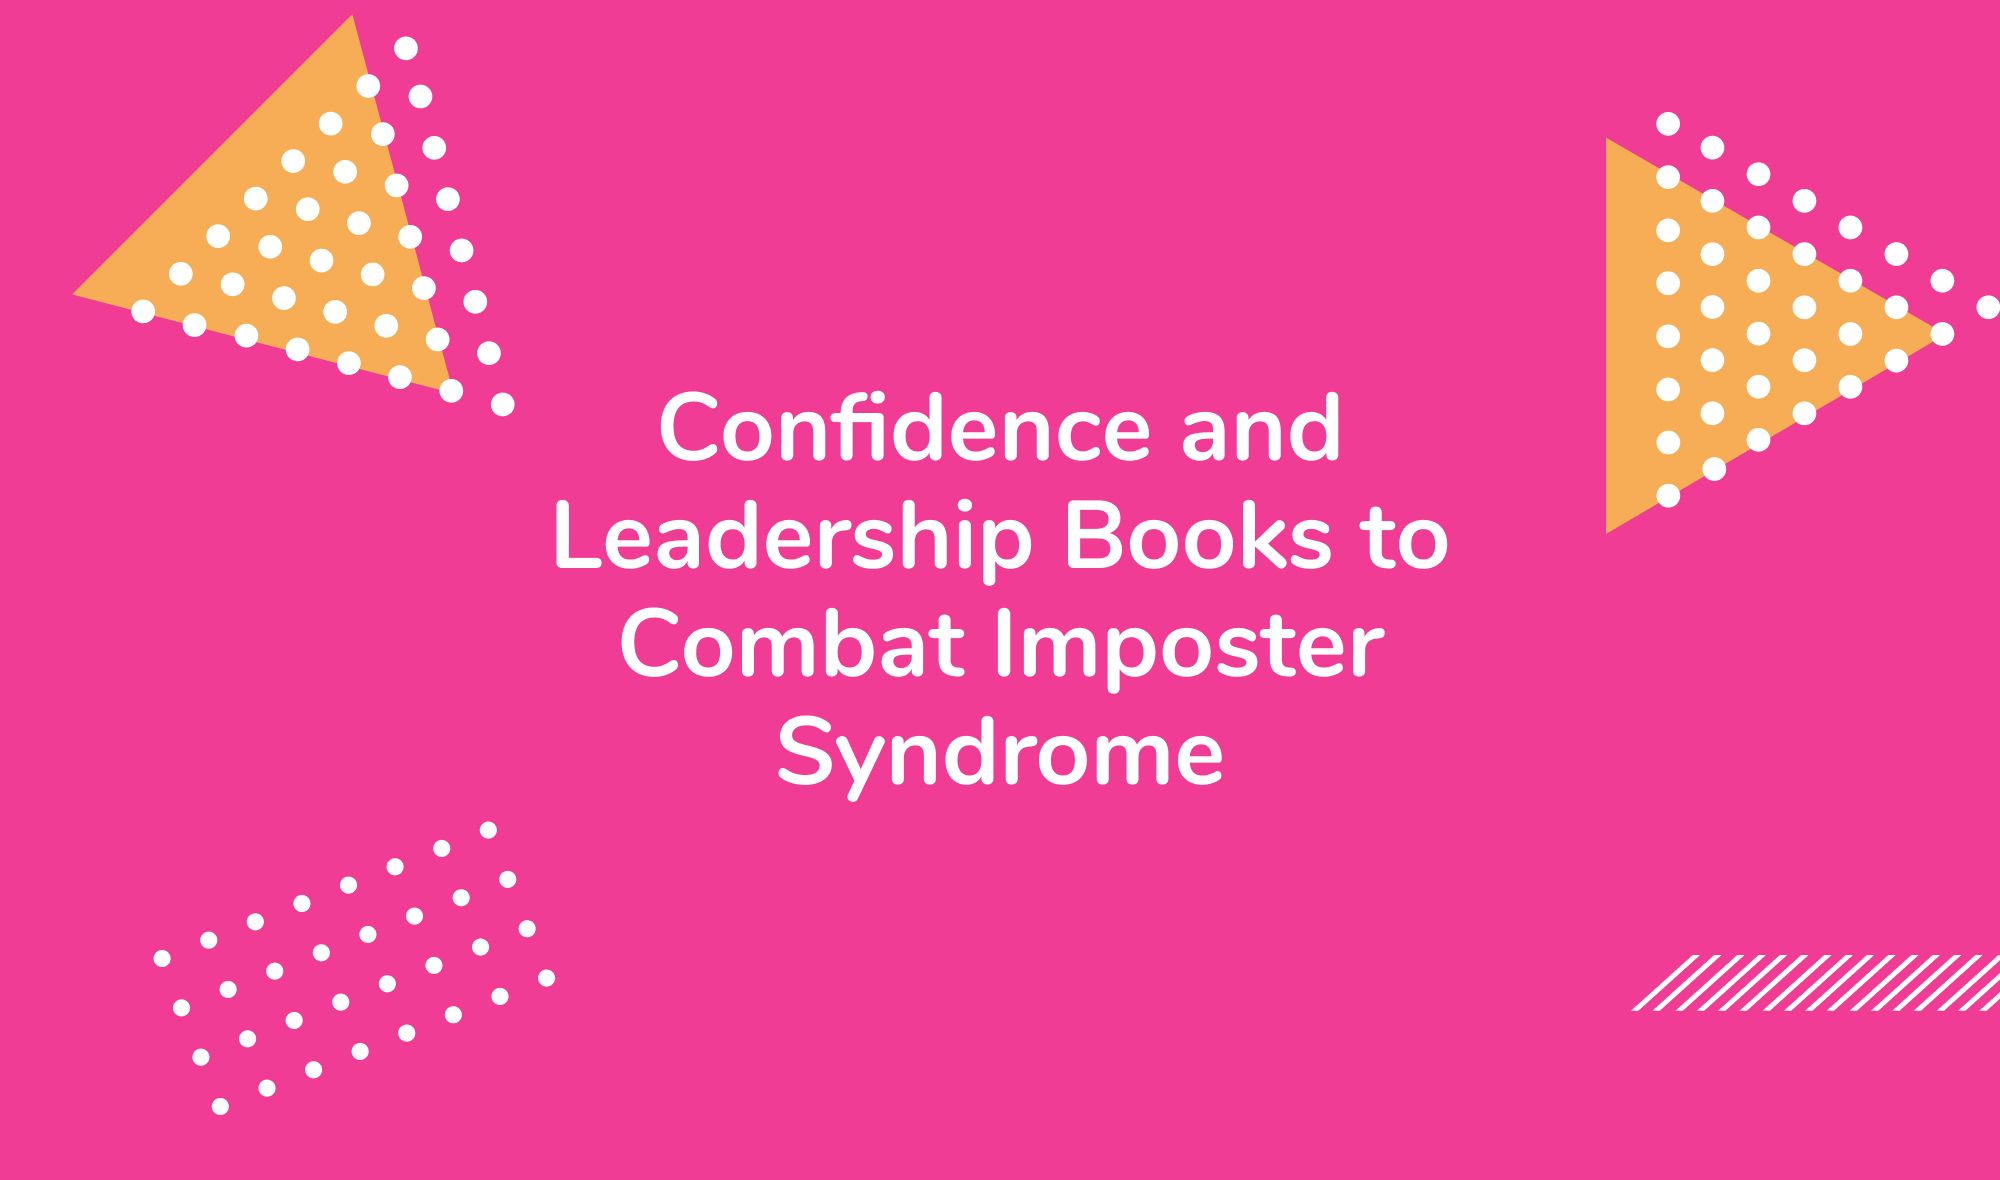 Confidence and Leadership Books to Combat Imposter Syndrome